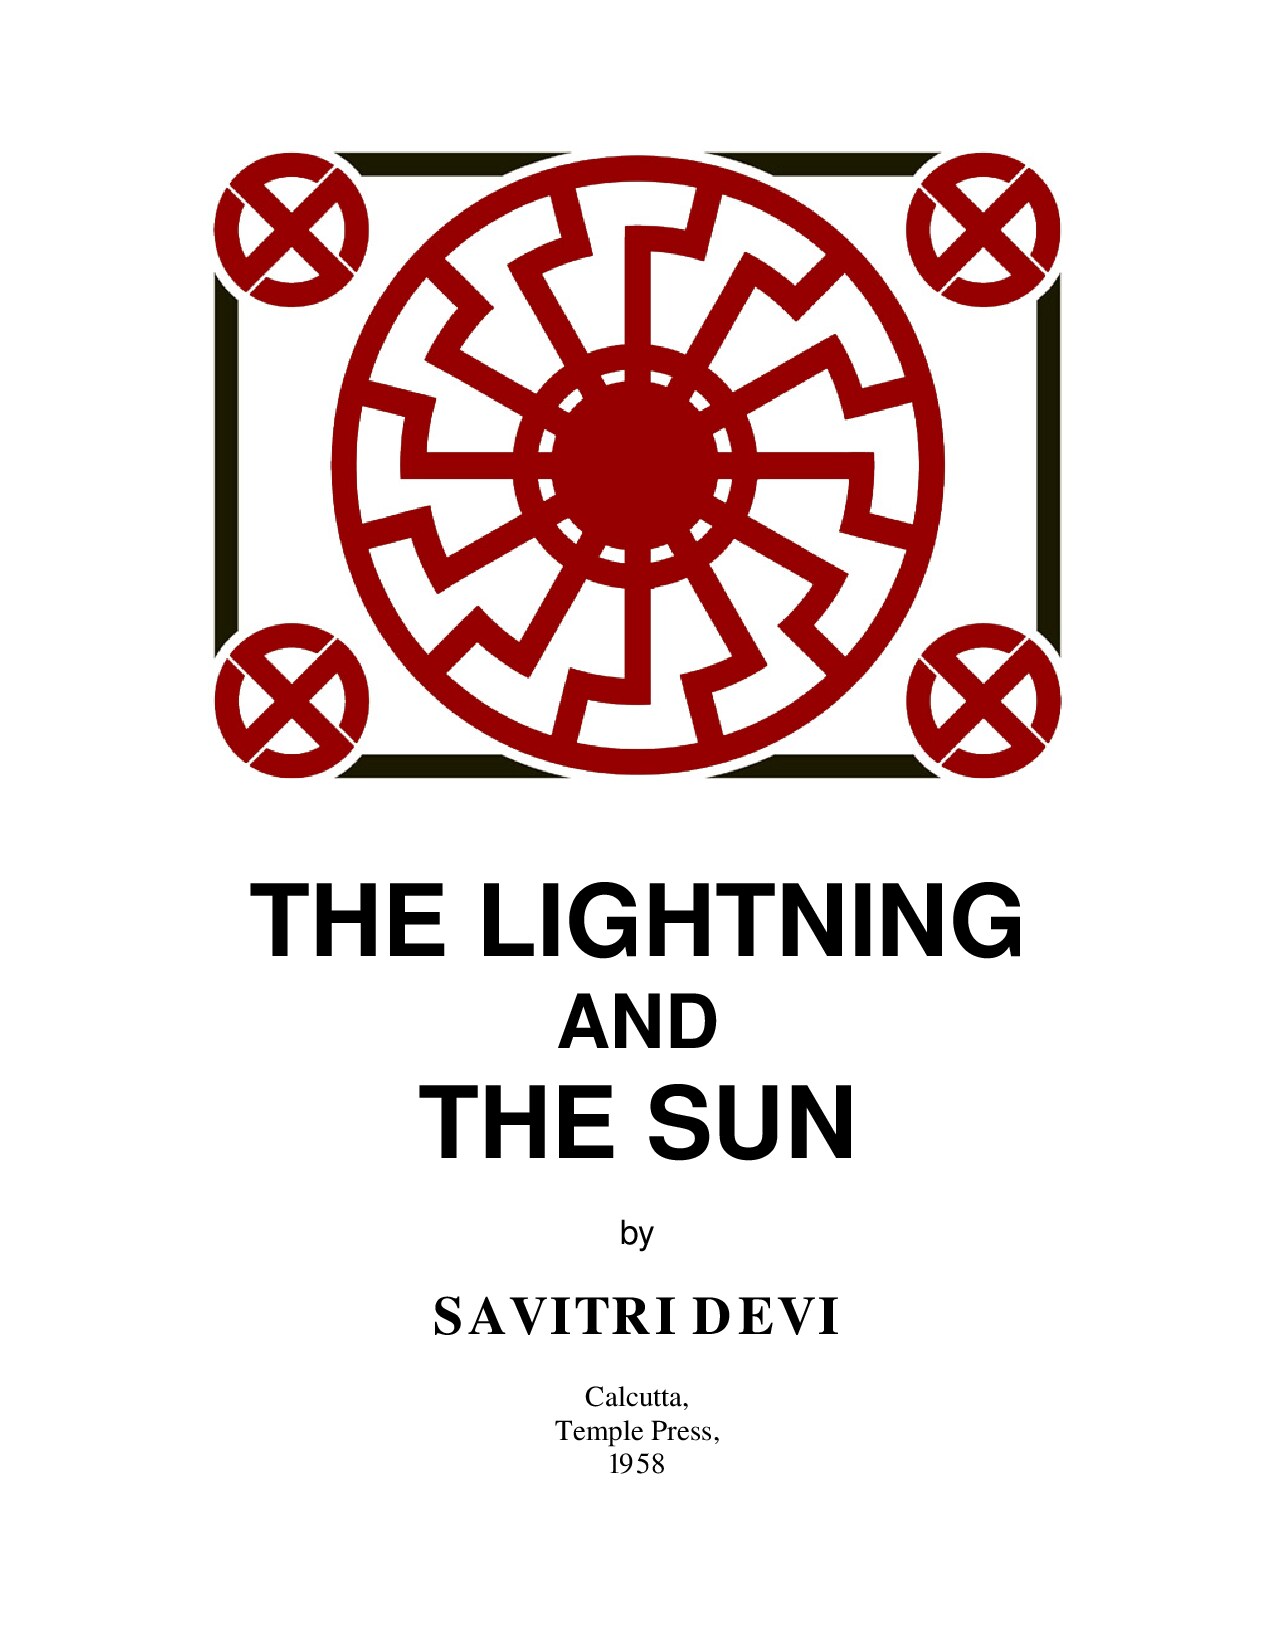 The Lightning and the Sun